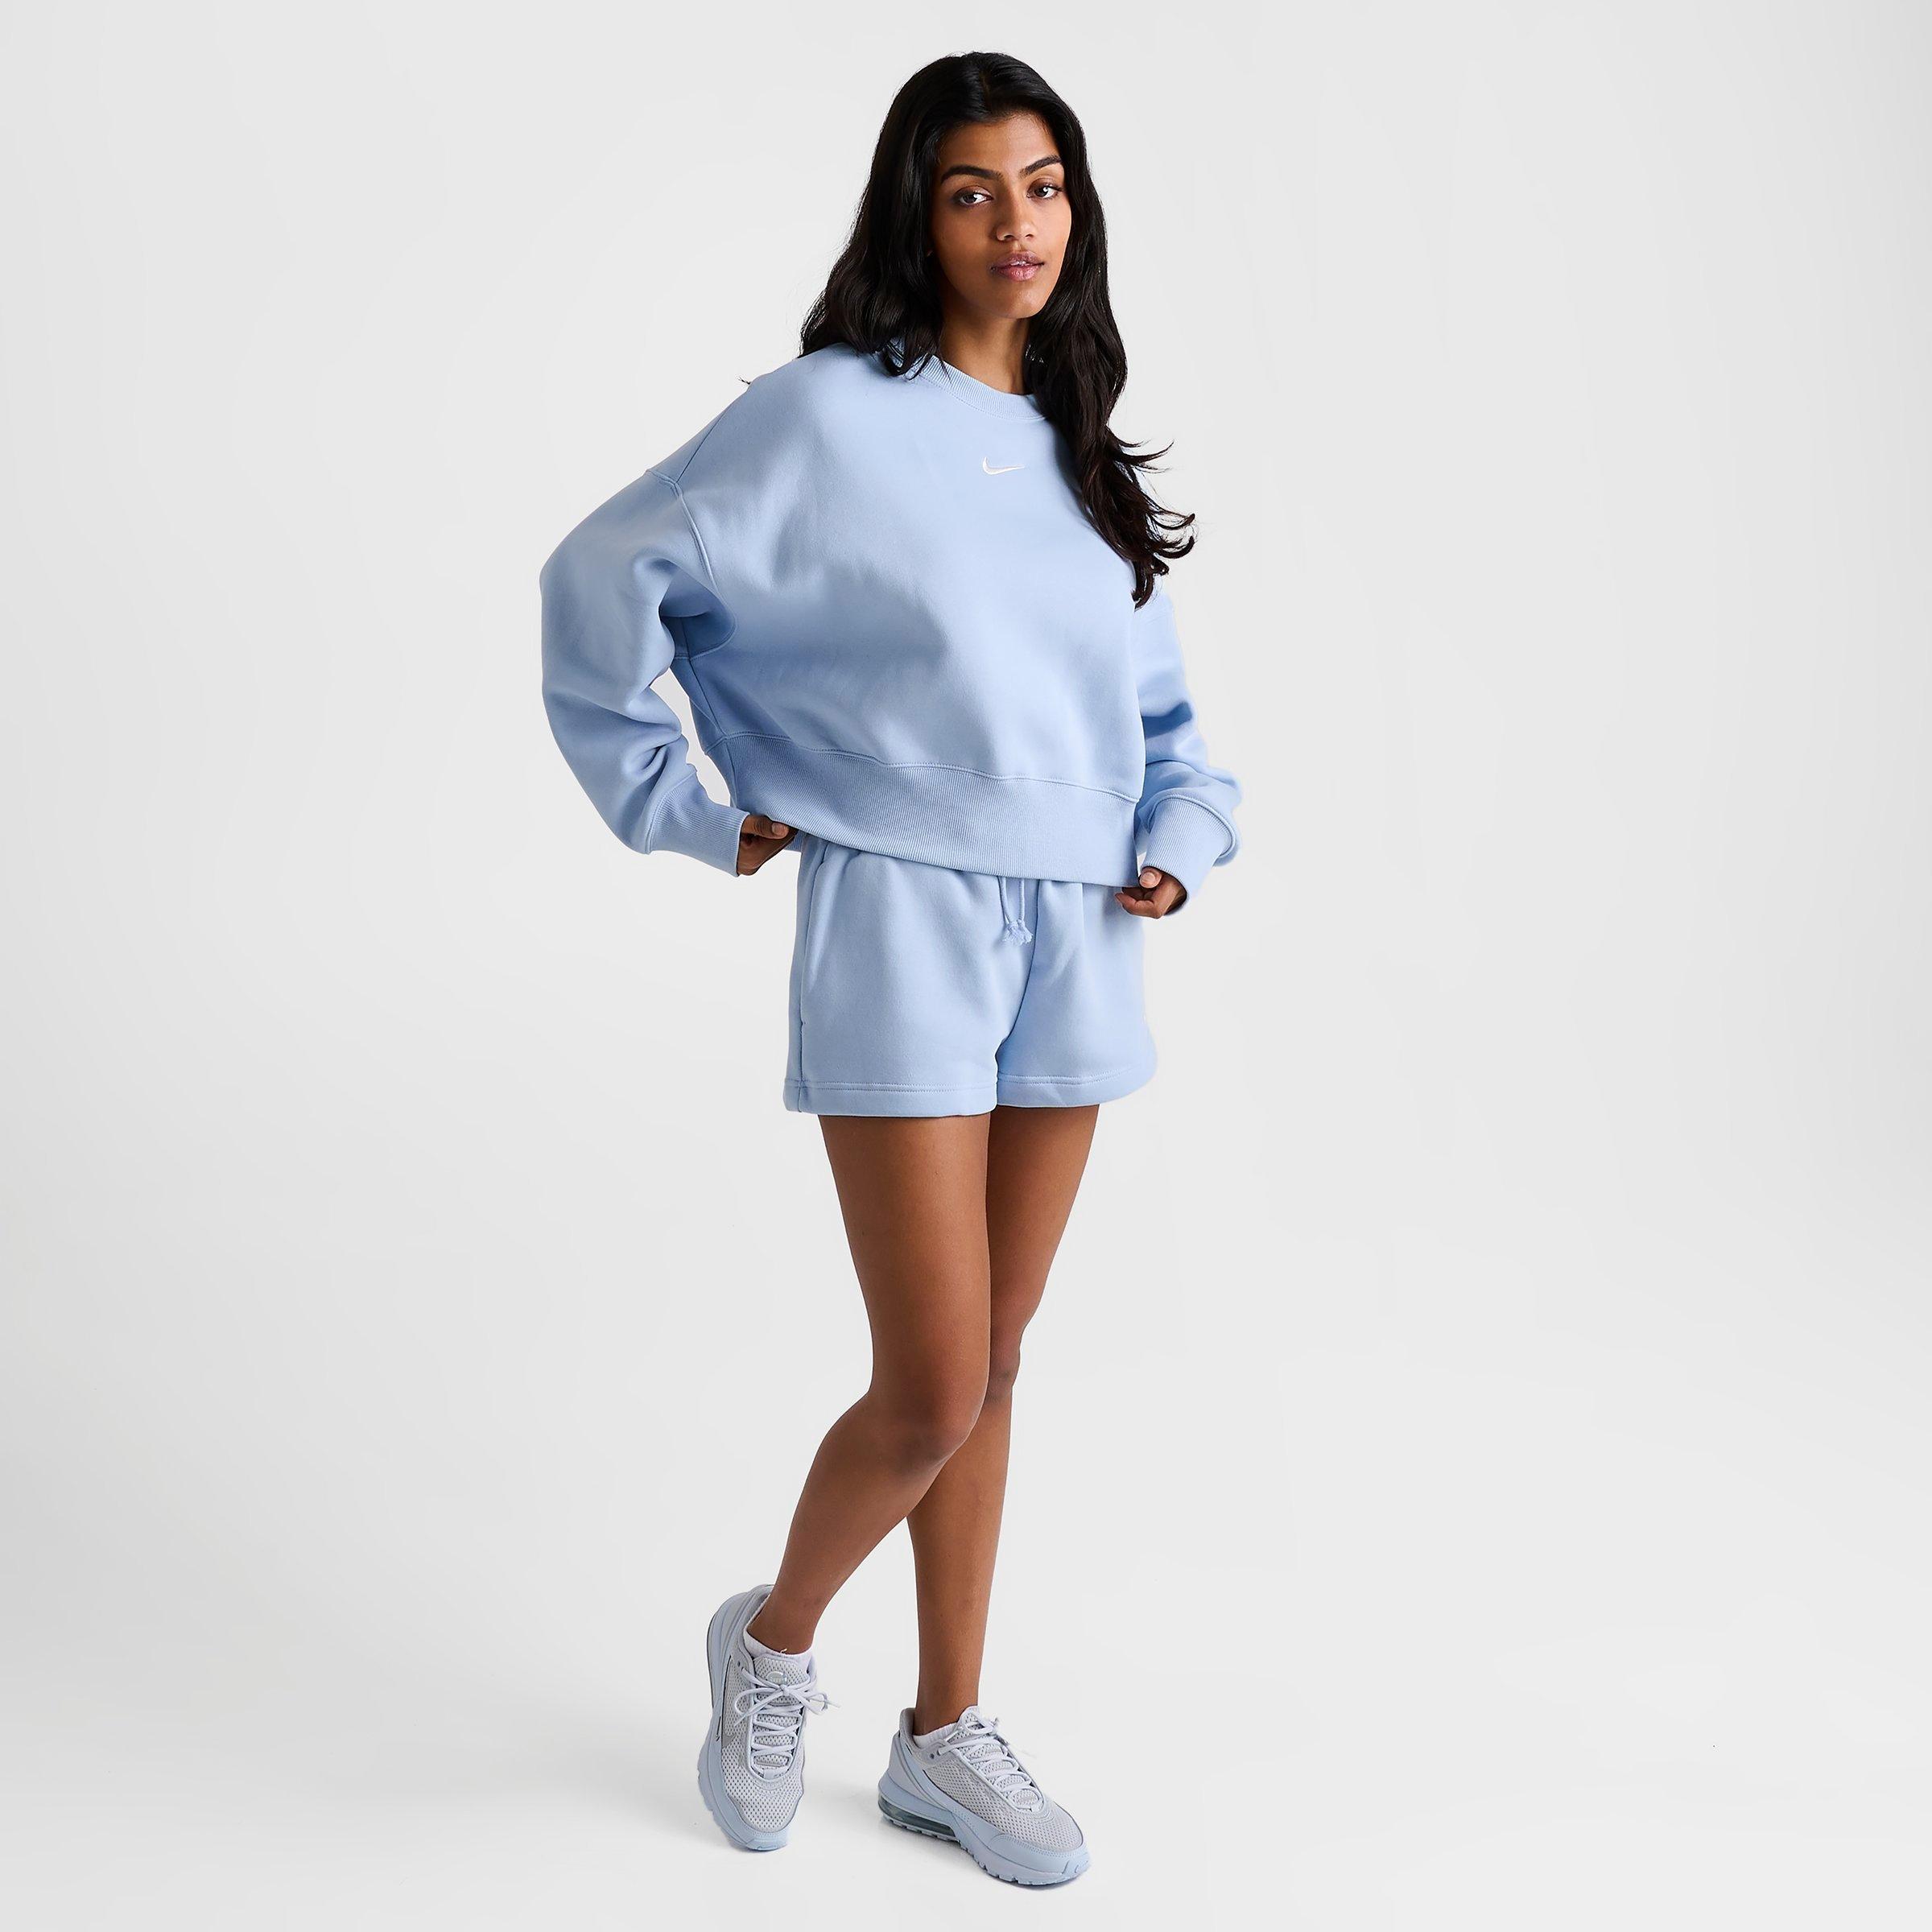 Womens Fashion Oversized Half Zip Pullover, shirts,50 cent